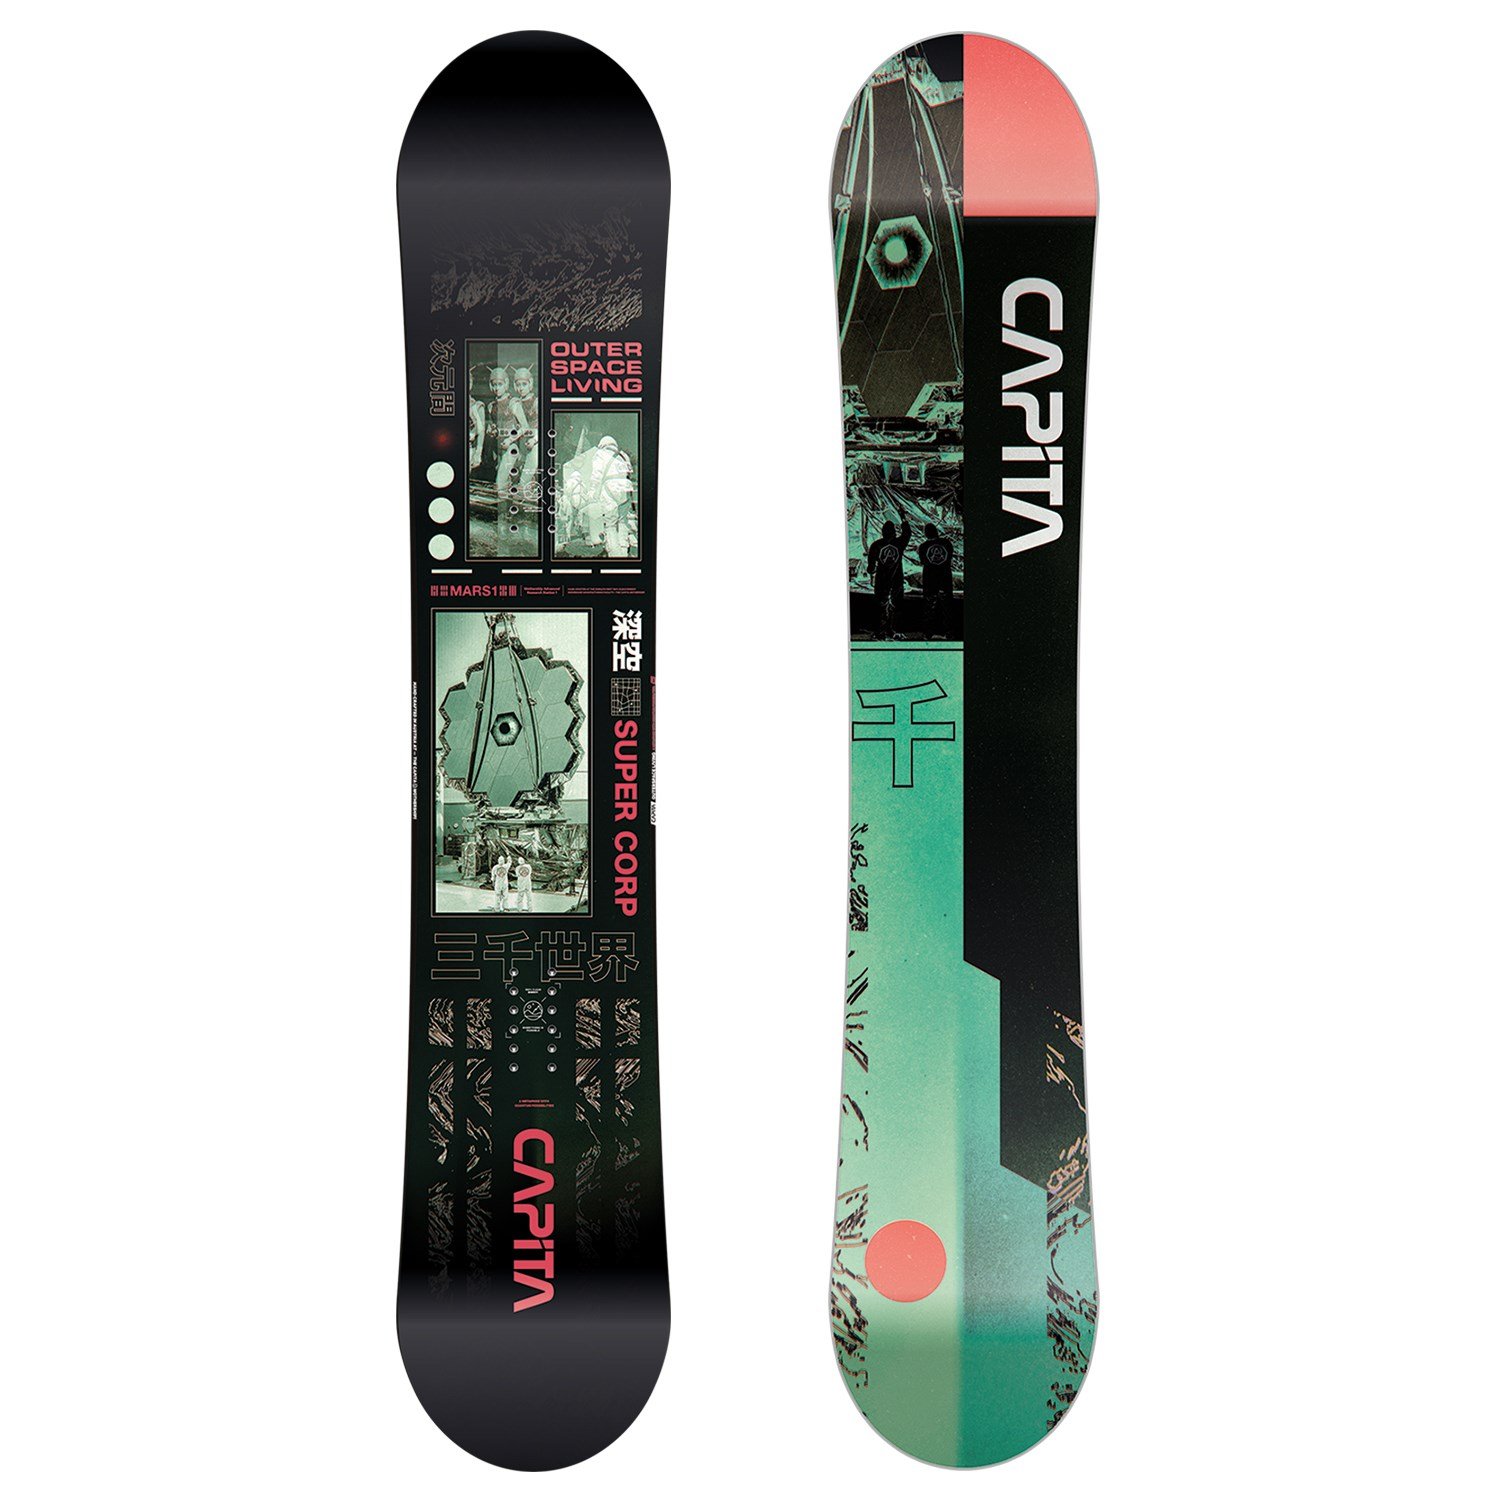 CAPiTA Outerspace Living Snowboard 2021 | evo